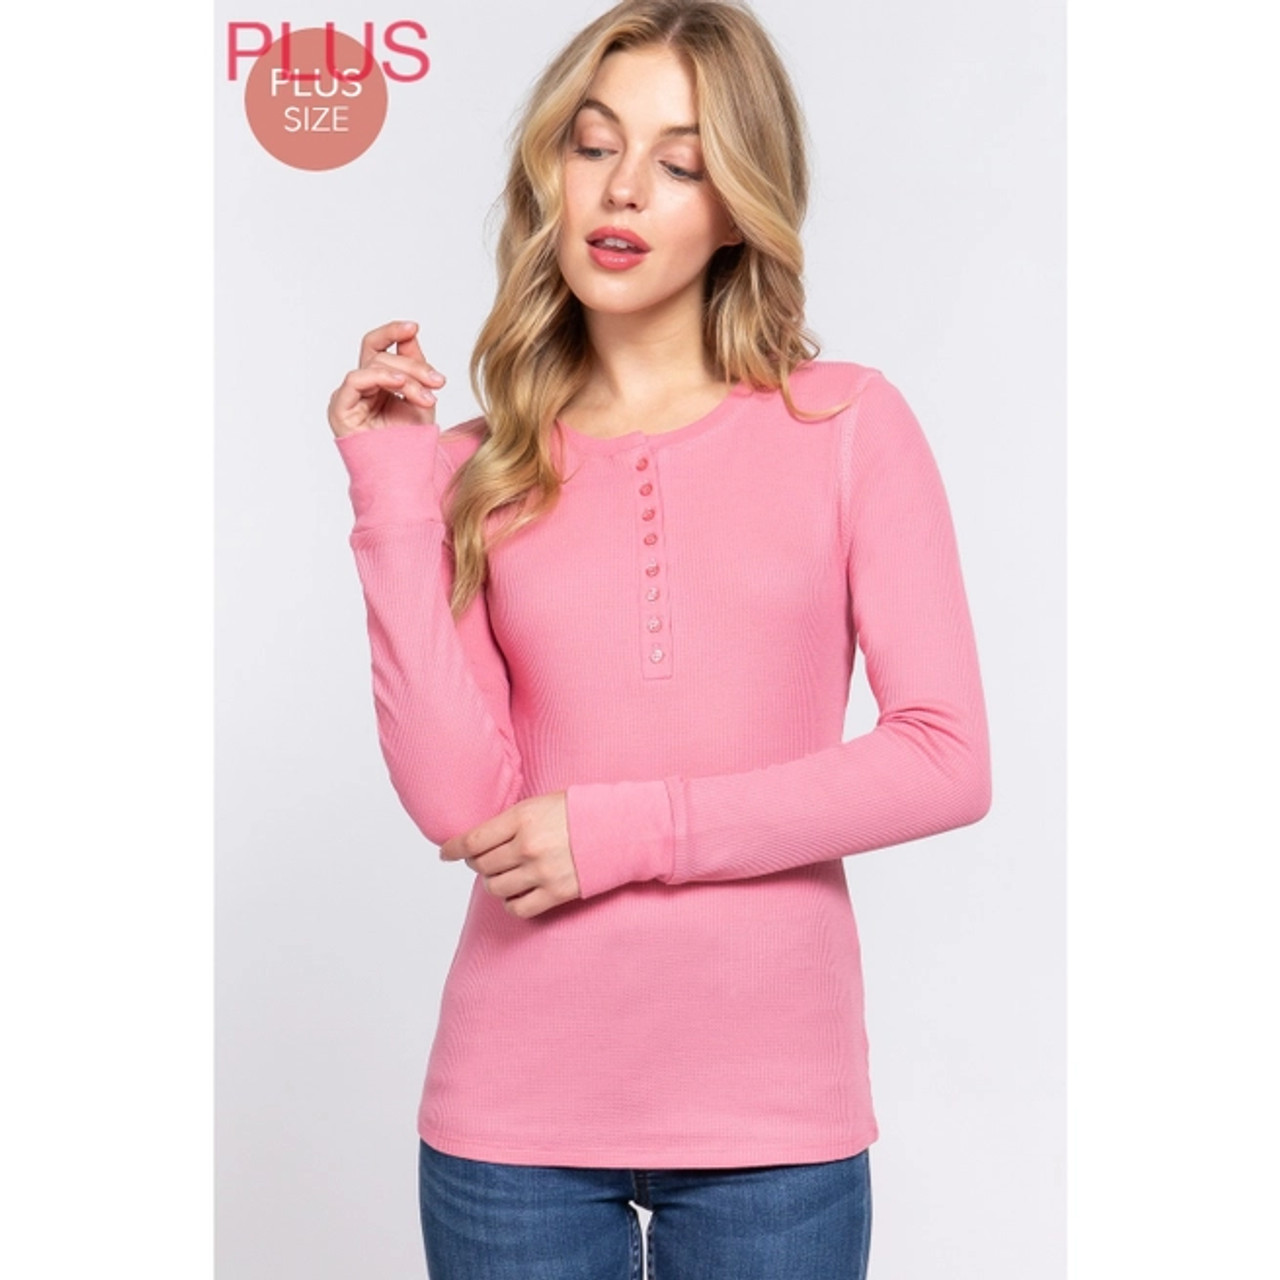 Yummie Long Sleeve Henley Thermal Top in Deep Pink - Busted Bra Shop